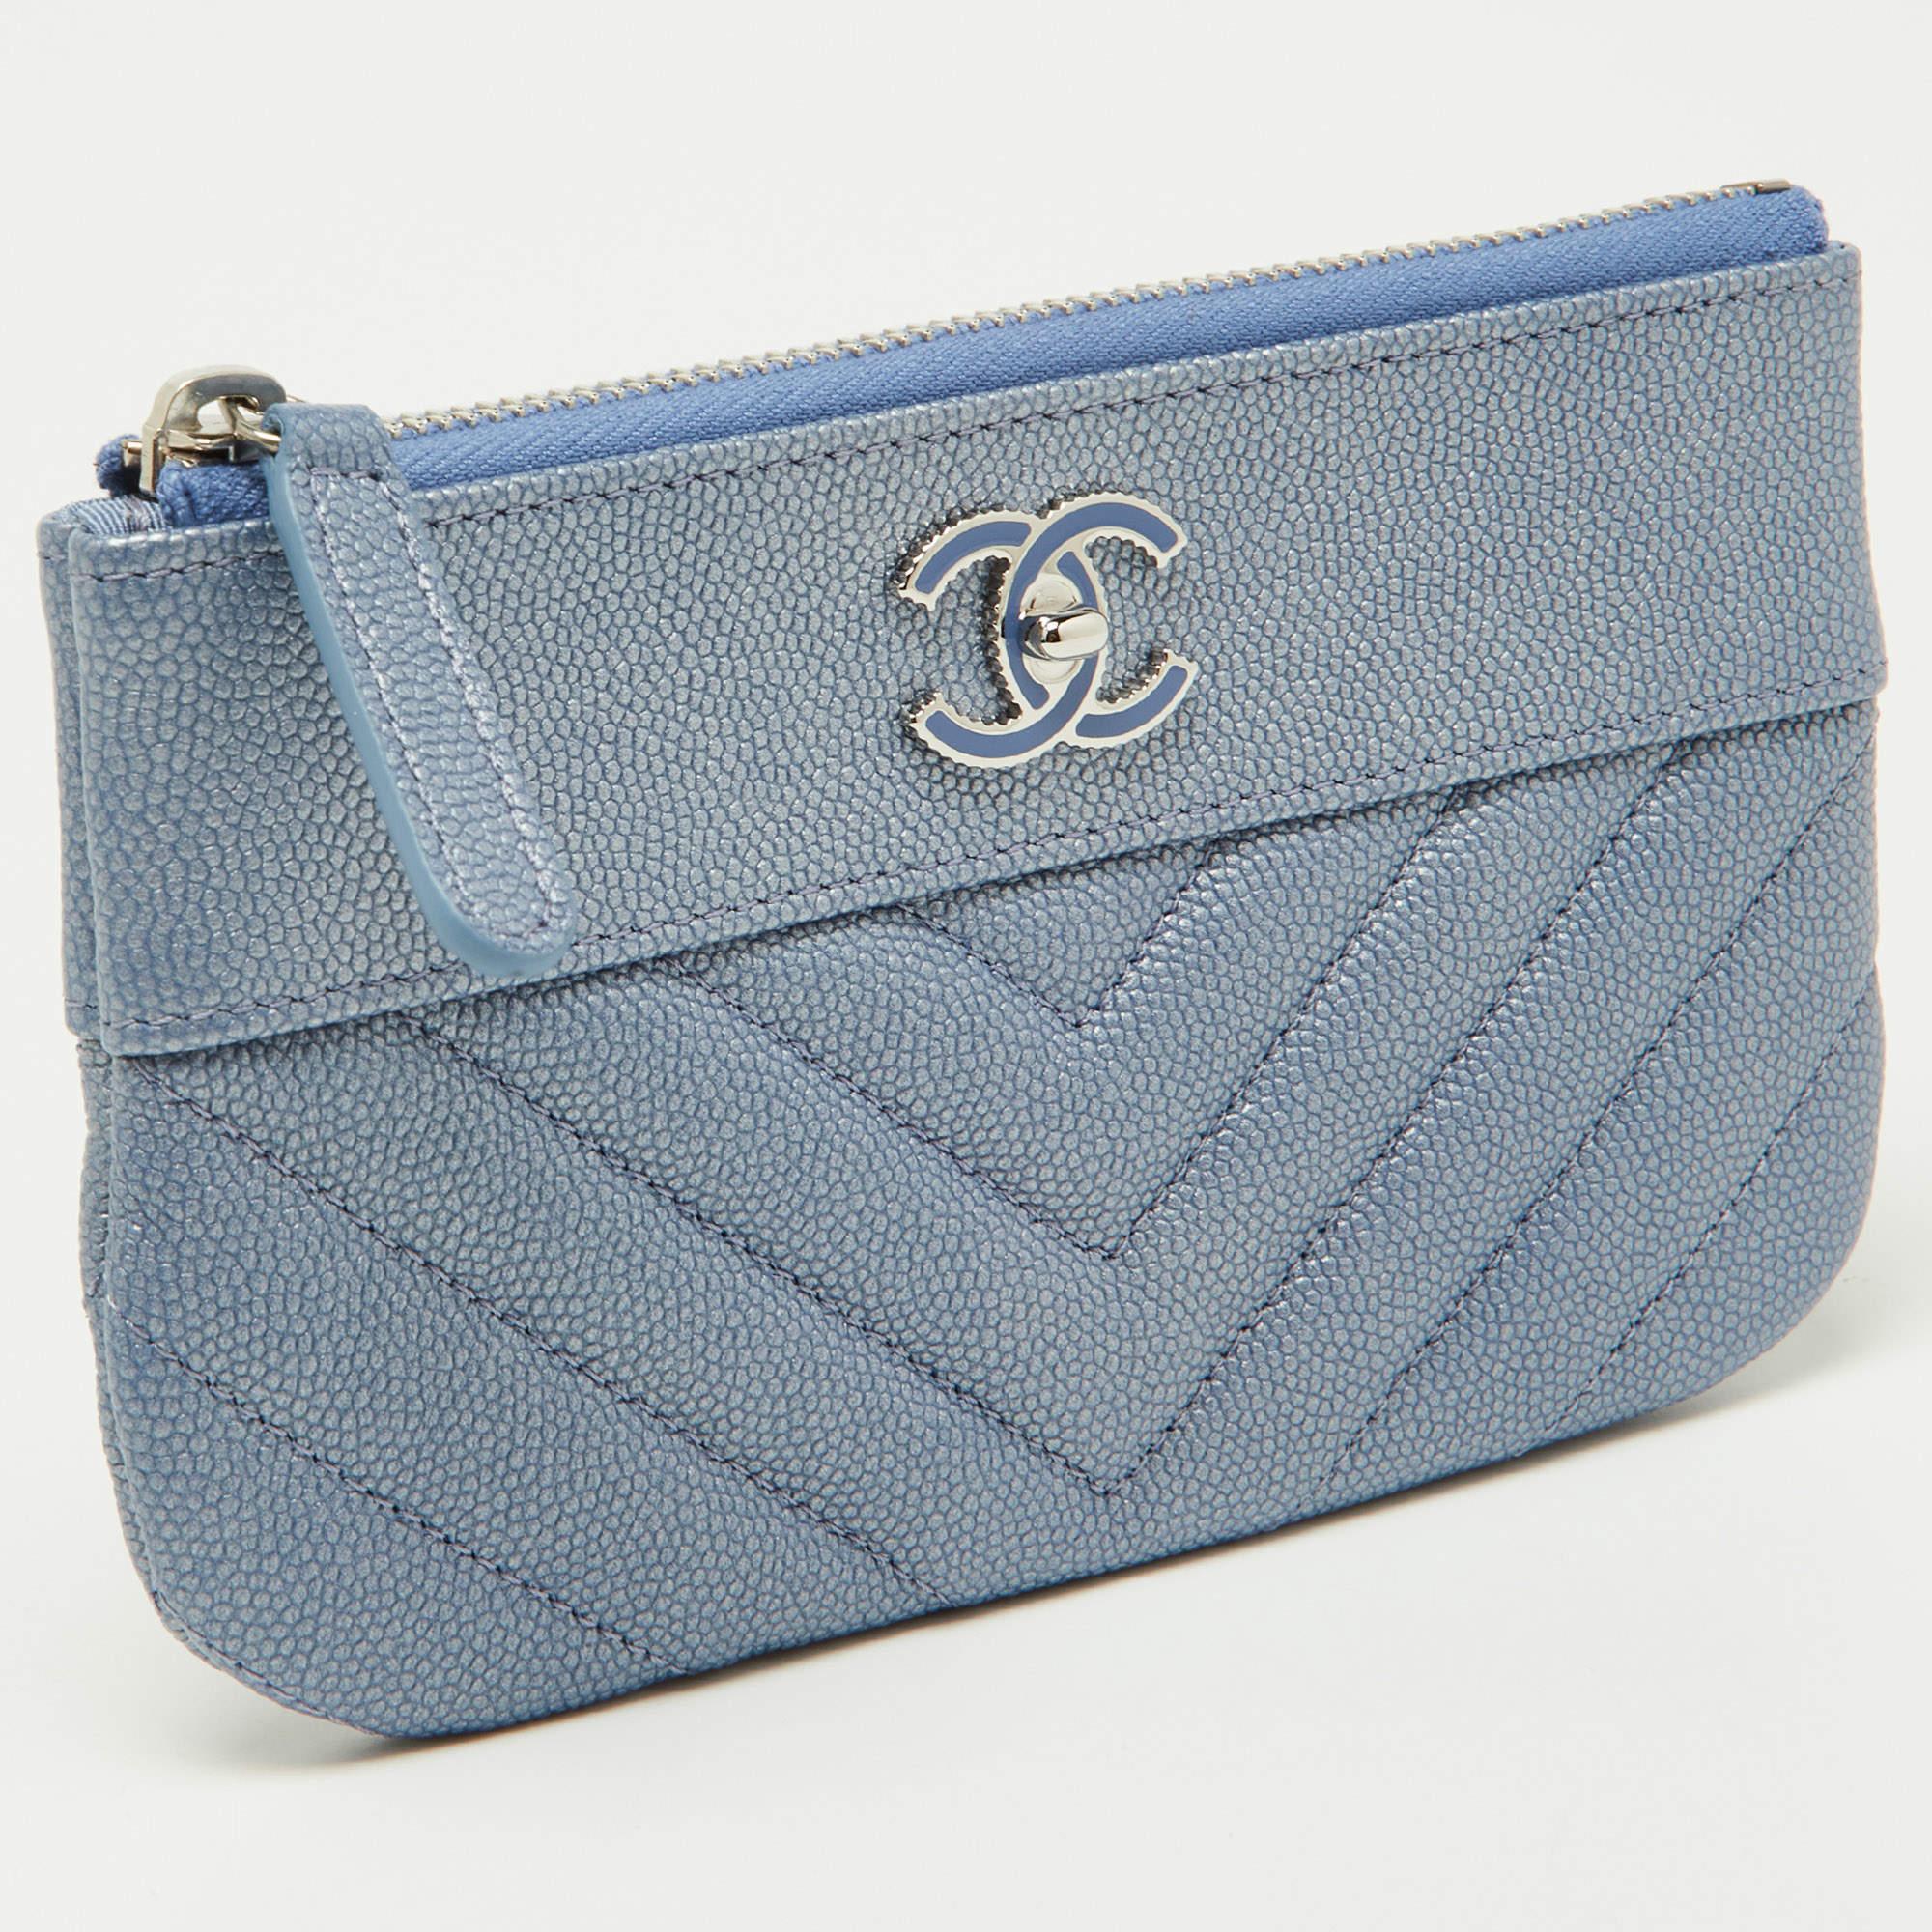 Store your essentials effortlessly in this sturdy Chanel CC pouch. It features an elegant design and a roomy interior. Featuring a rich shade, this pouch is a stylish accessory.

Includes
Original Dustbag, Info Booklet, Authenticity Card